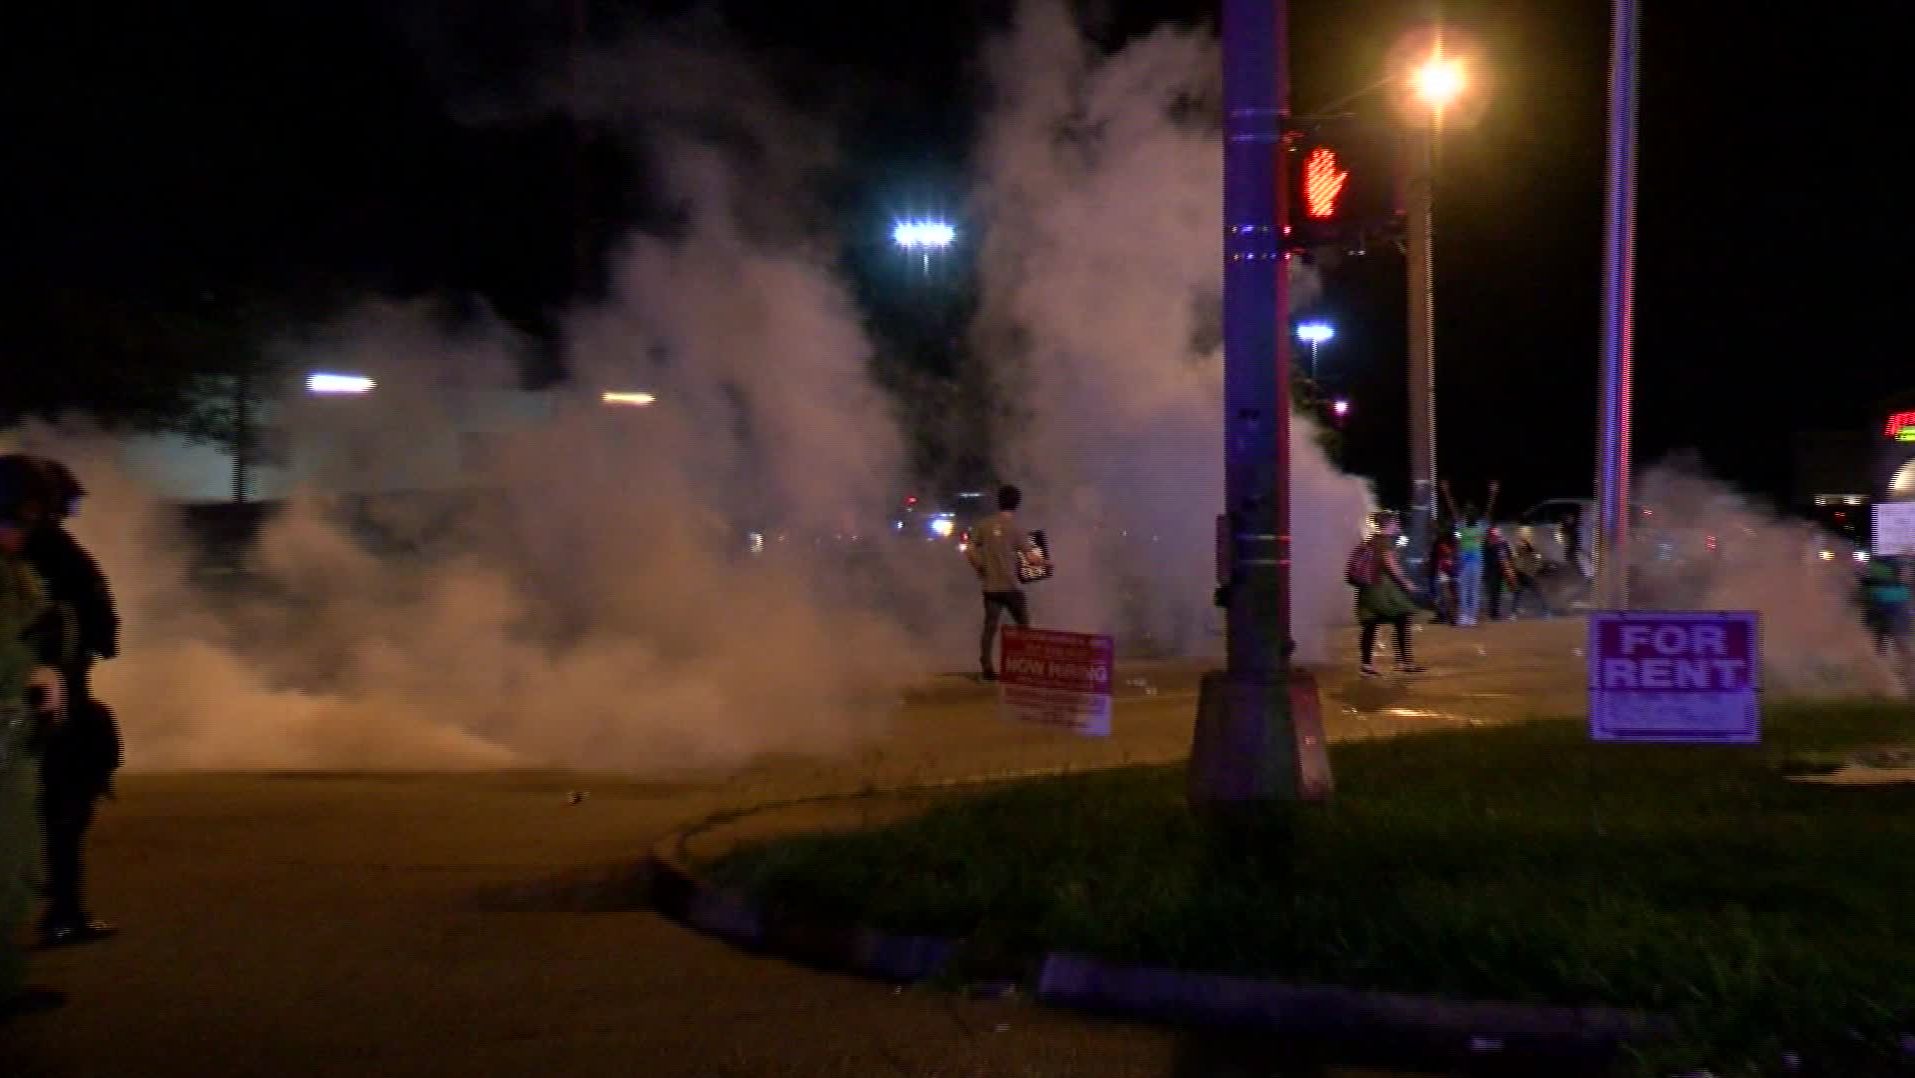 Police in riot gear released flares and smoke canisters into a crowd of protesters on August 22, 2020, CNN affiliate KATC reported.